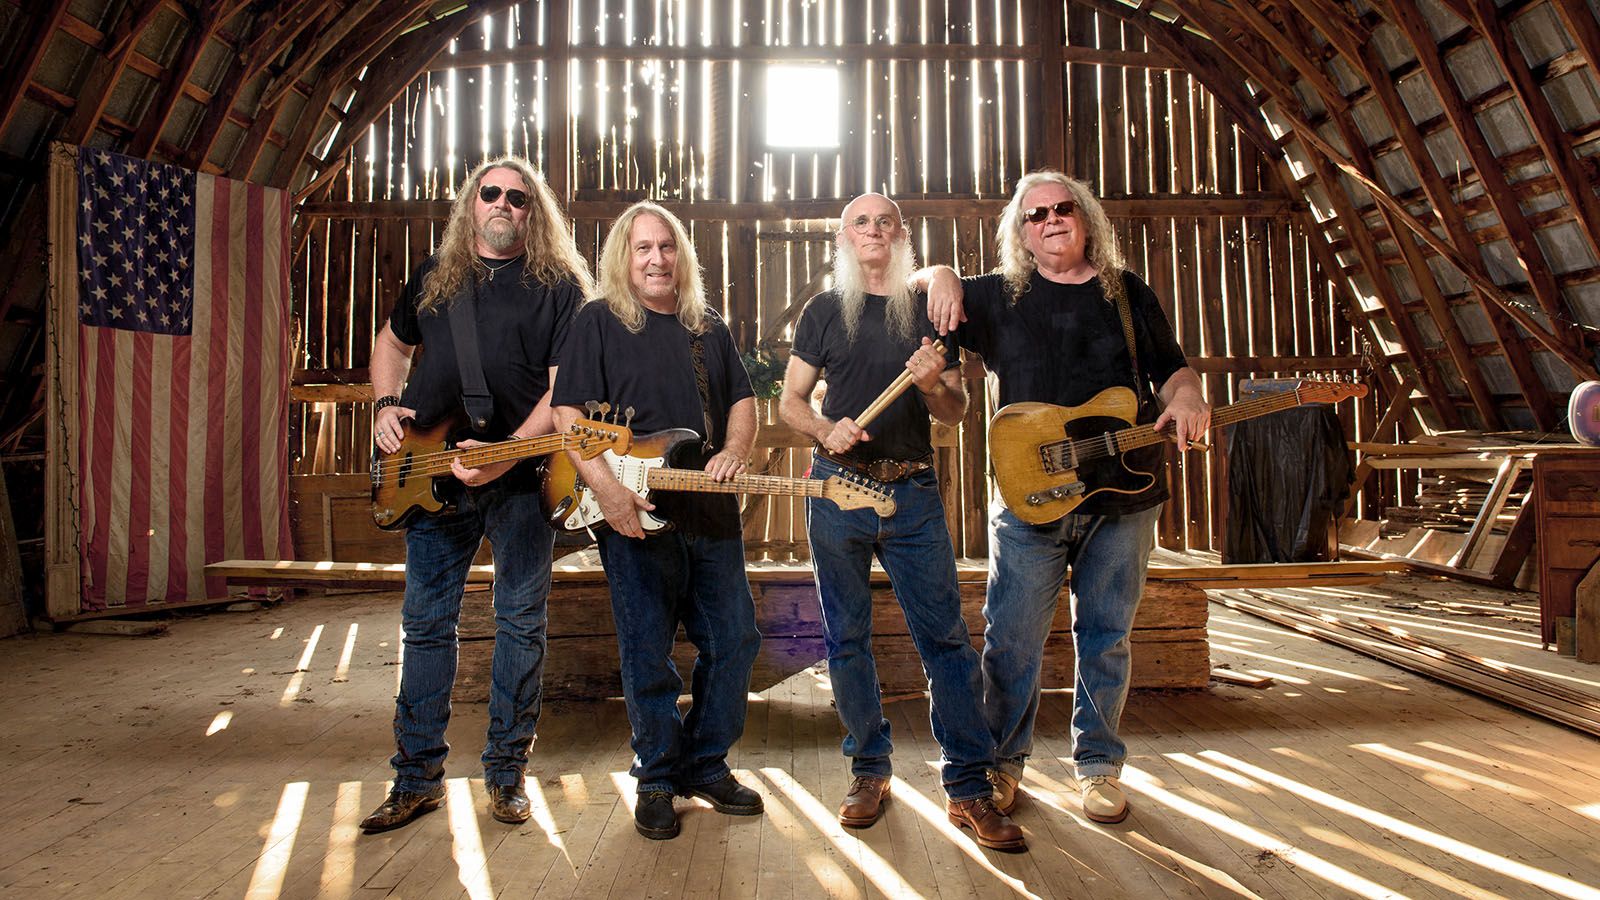 Kentucky Headhunters will be joined by Molly Hatchet on Sept. 30 at Honeywell Center.